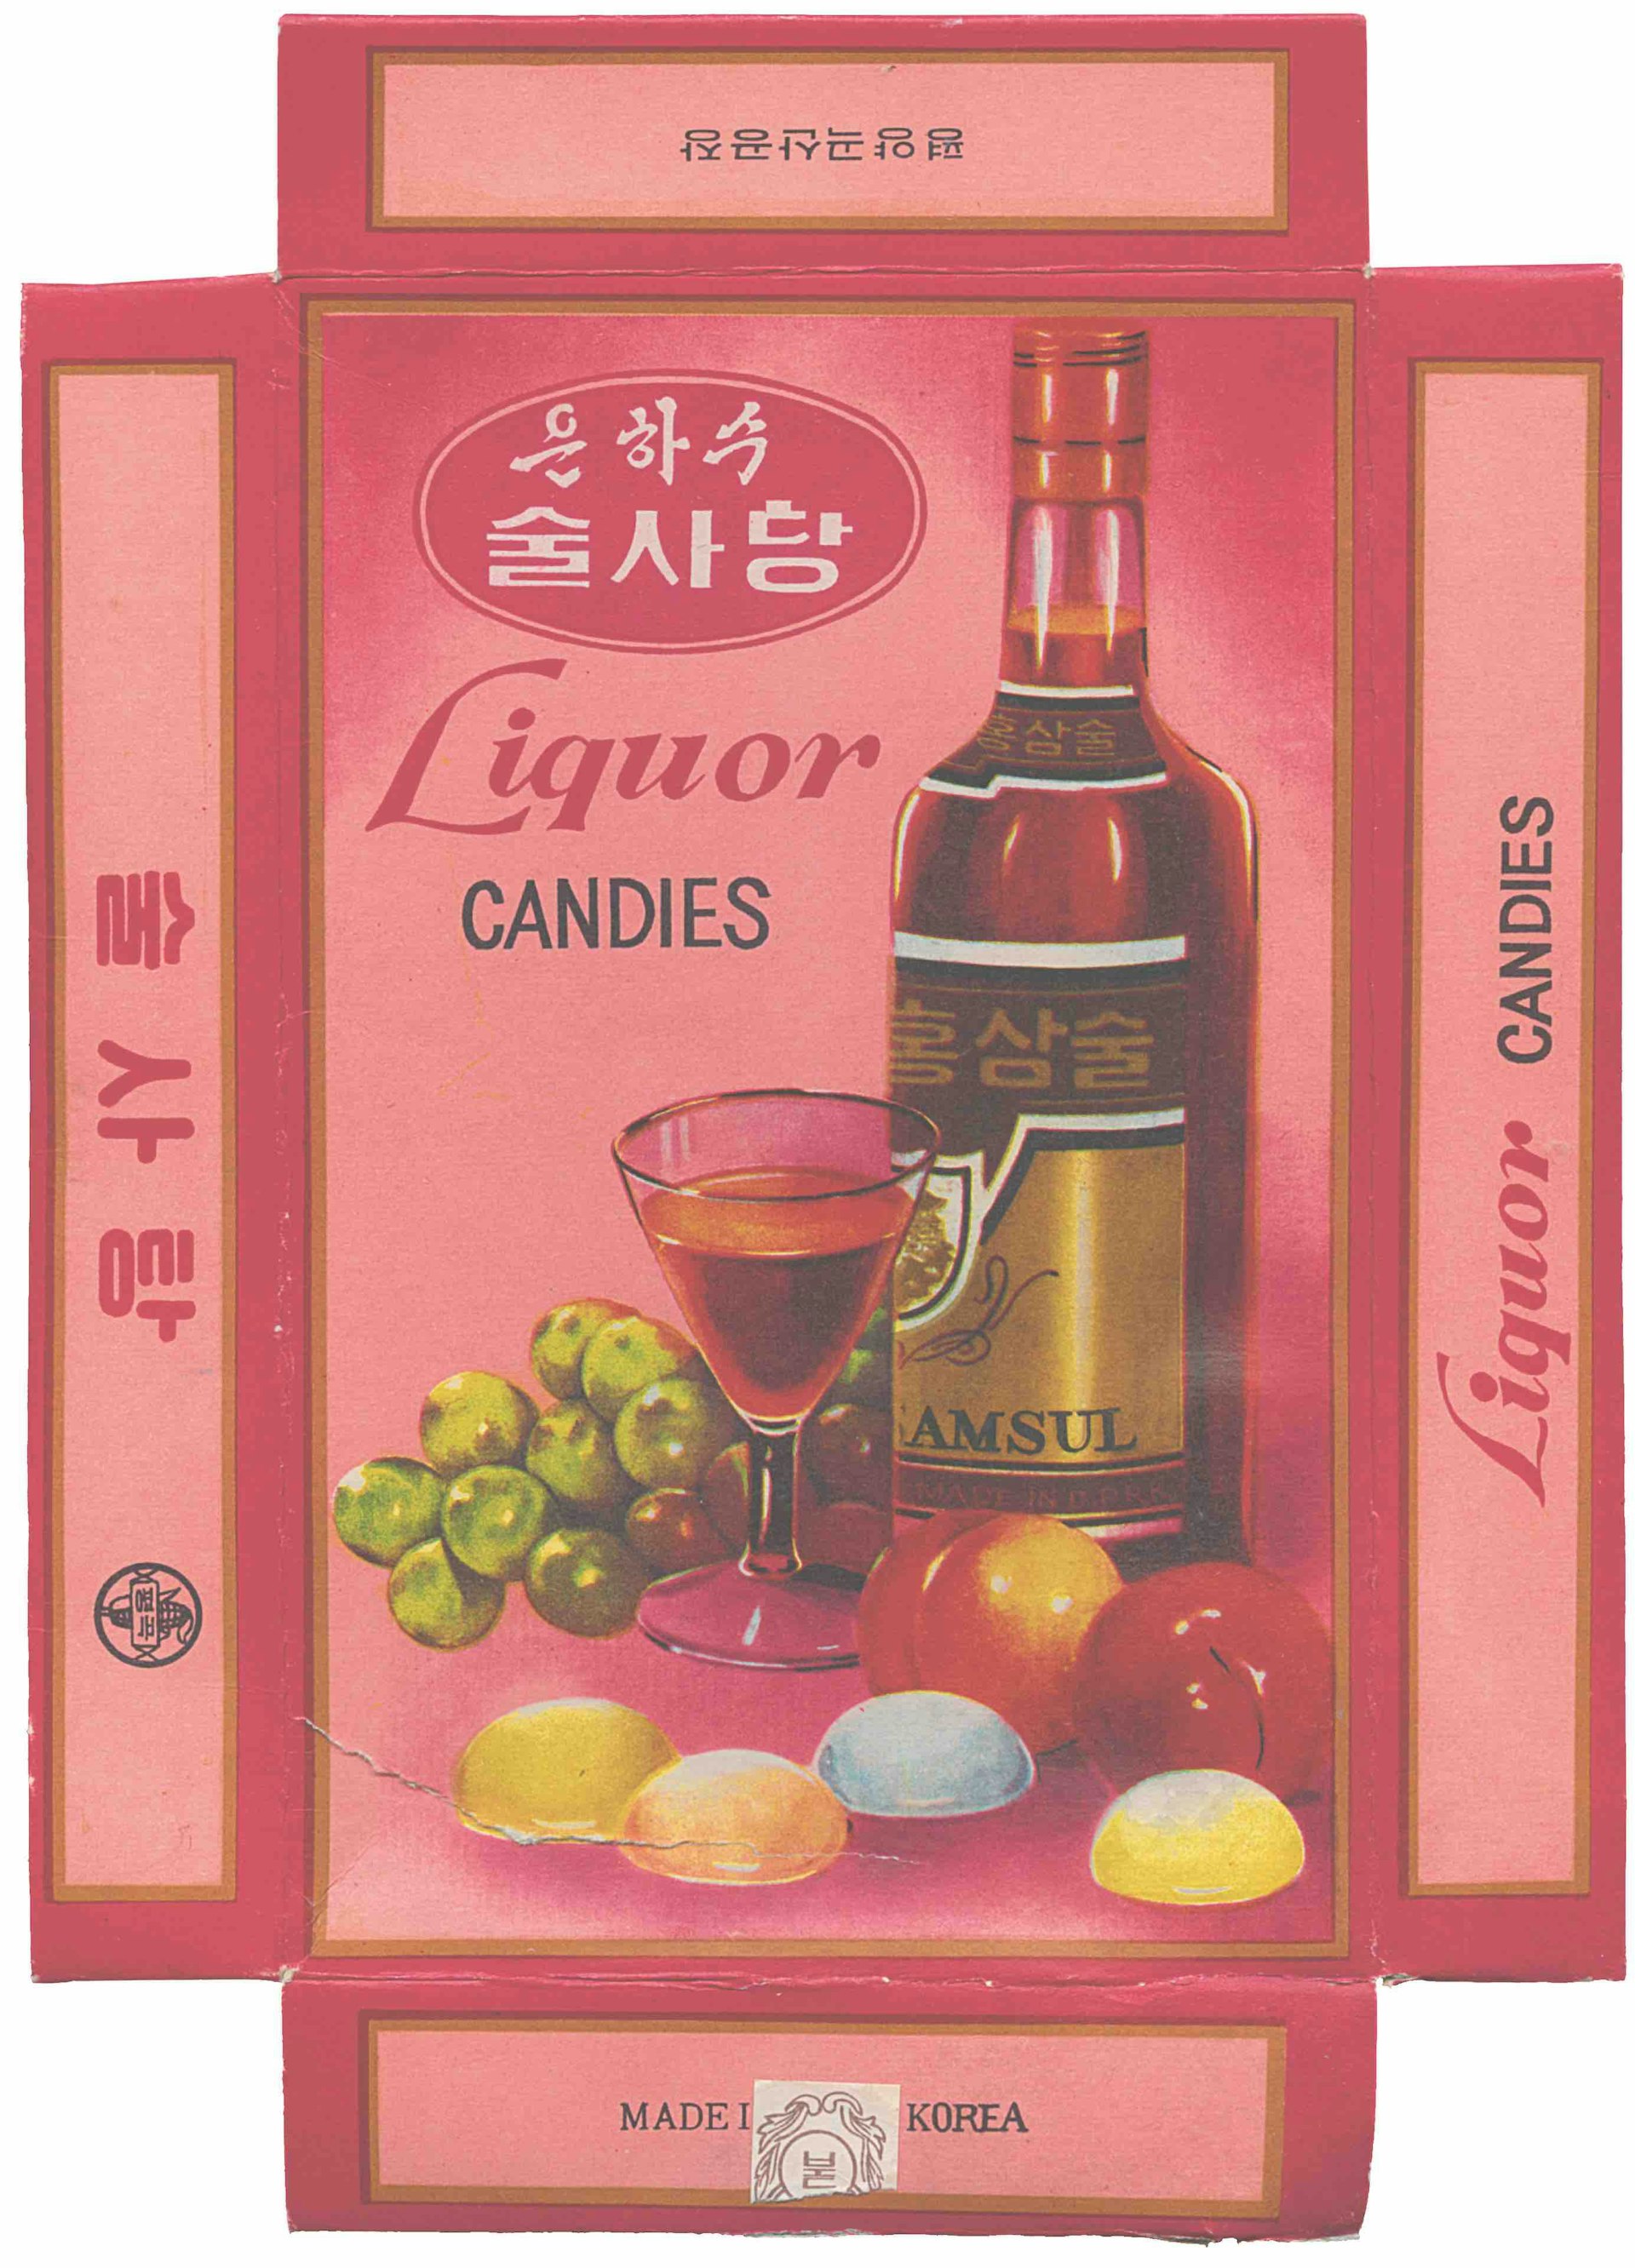 A box of Liquor Candies that emulates Western-style packaging associated in North Korea with luxury. The candies are filled with red ginseng-infused alcohol.